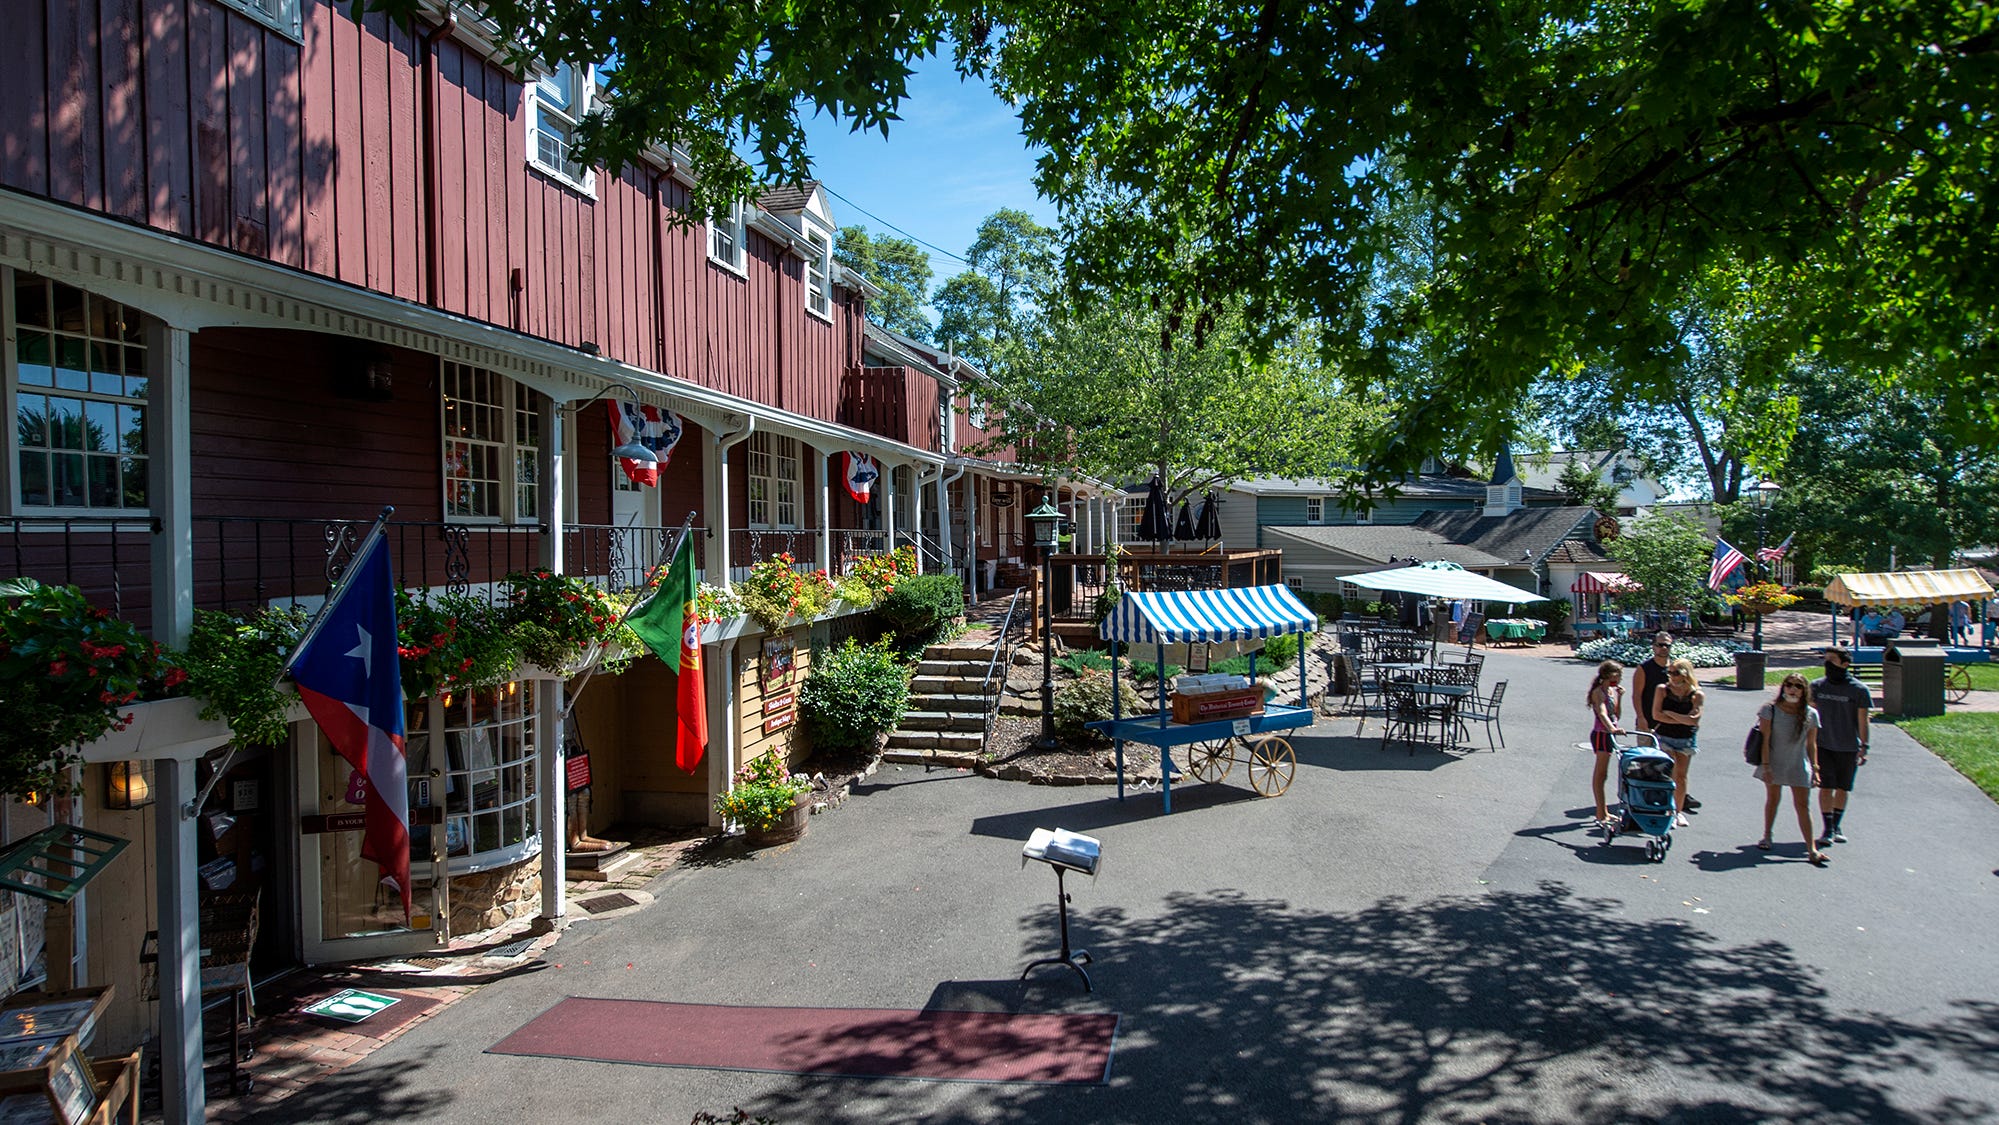 Festivals will look different this year at Peddler's Village